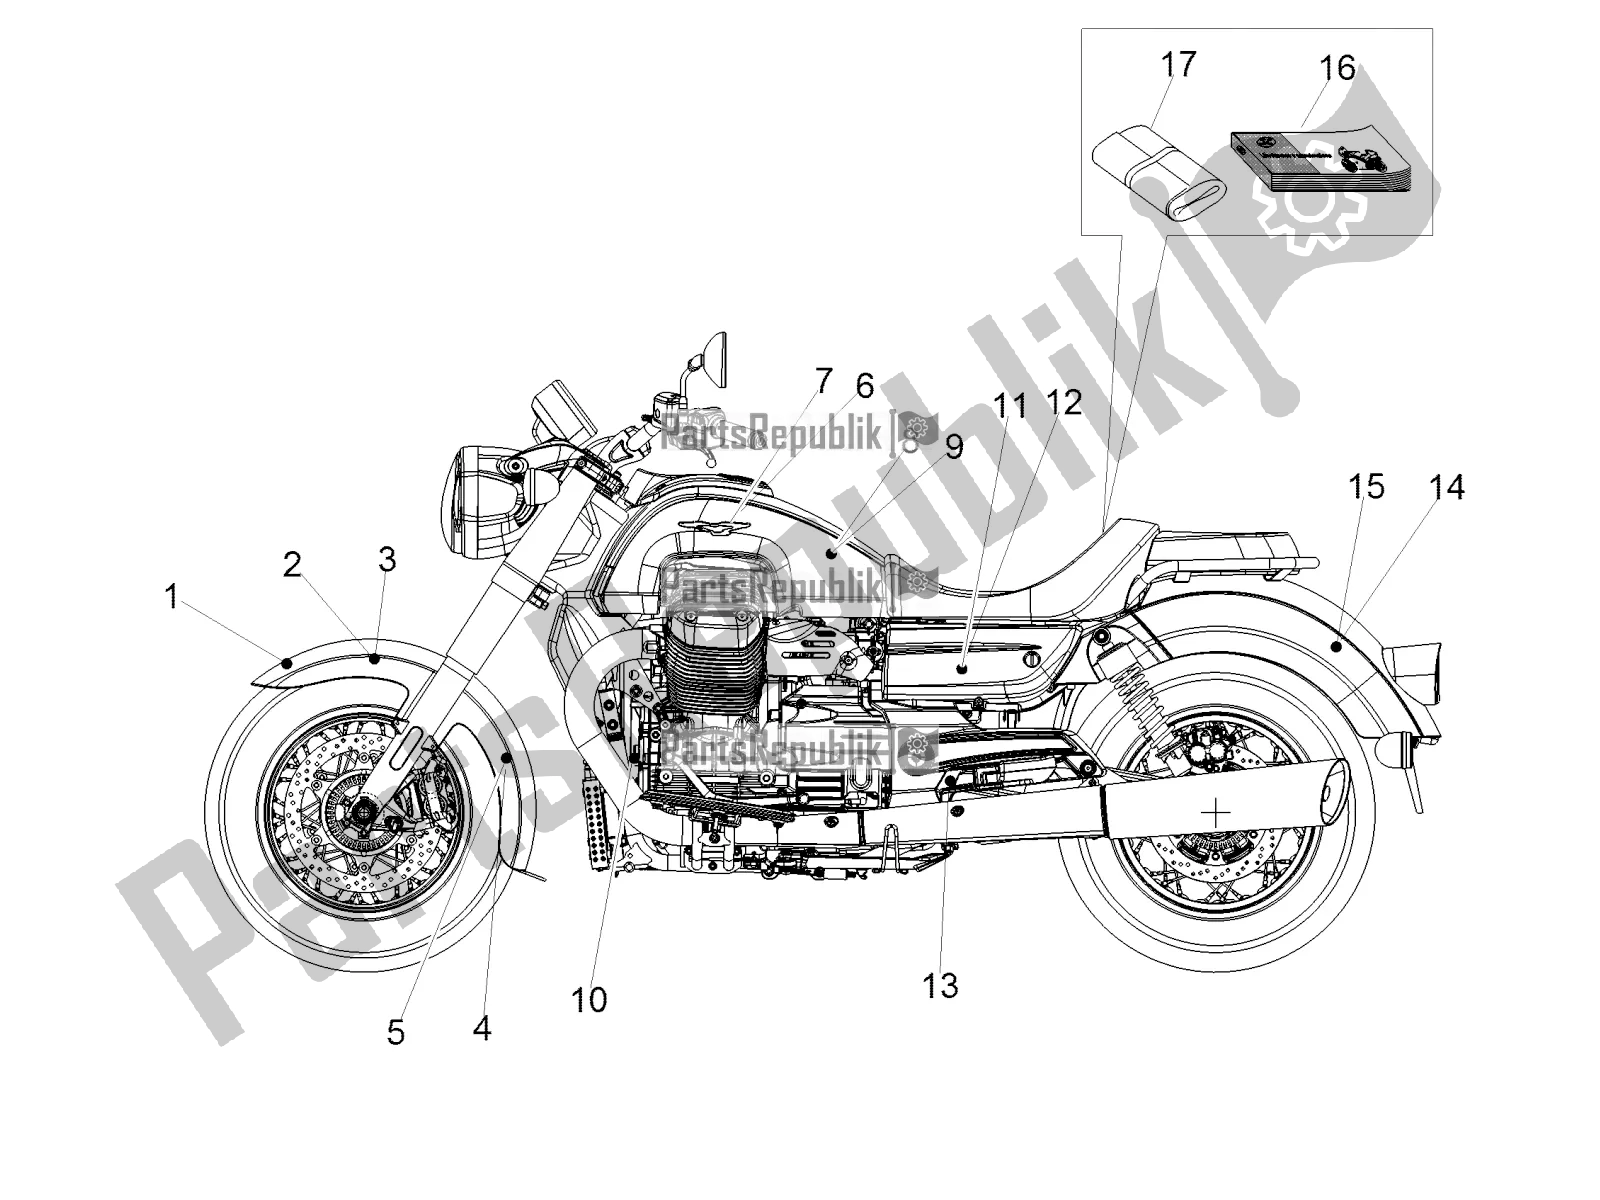 All parts for the Decal of the Moto-Guzzi Eldorado 1400 ABS 2017